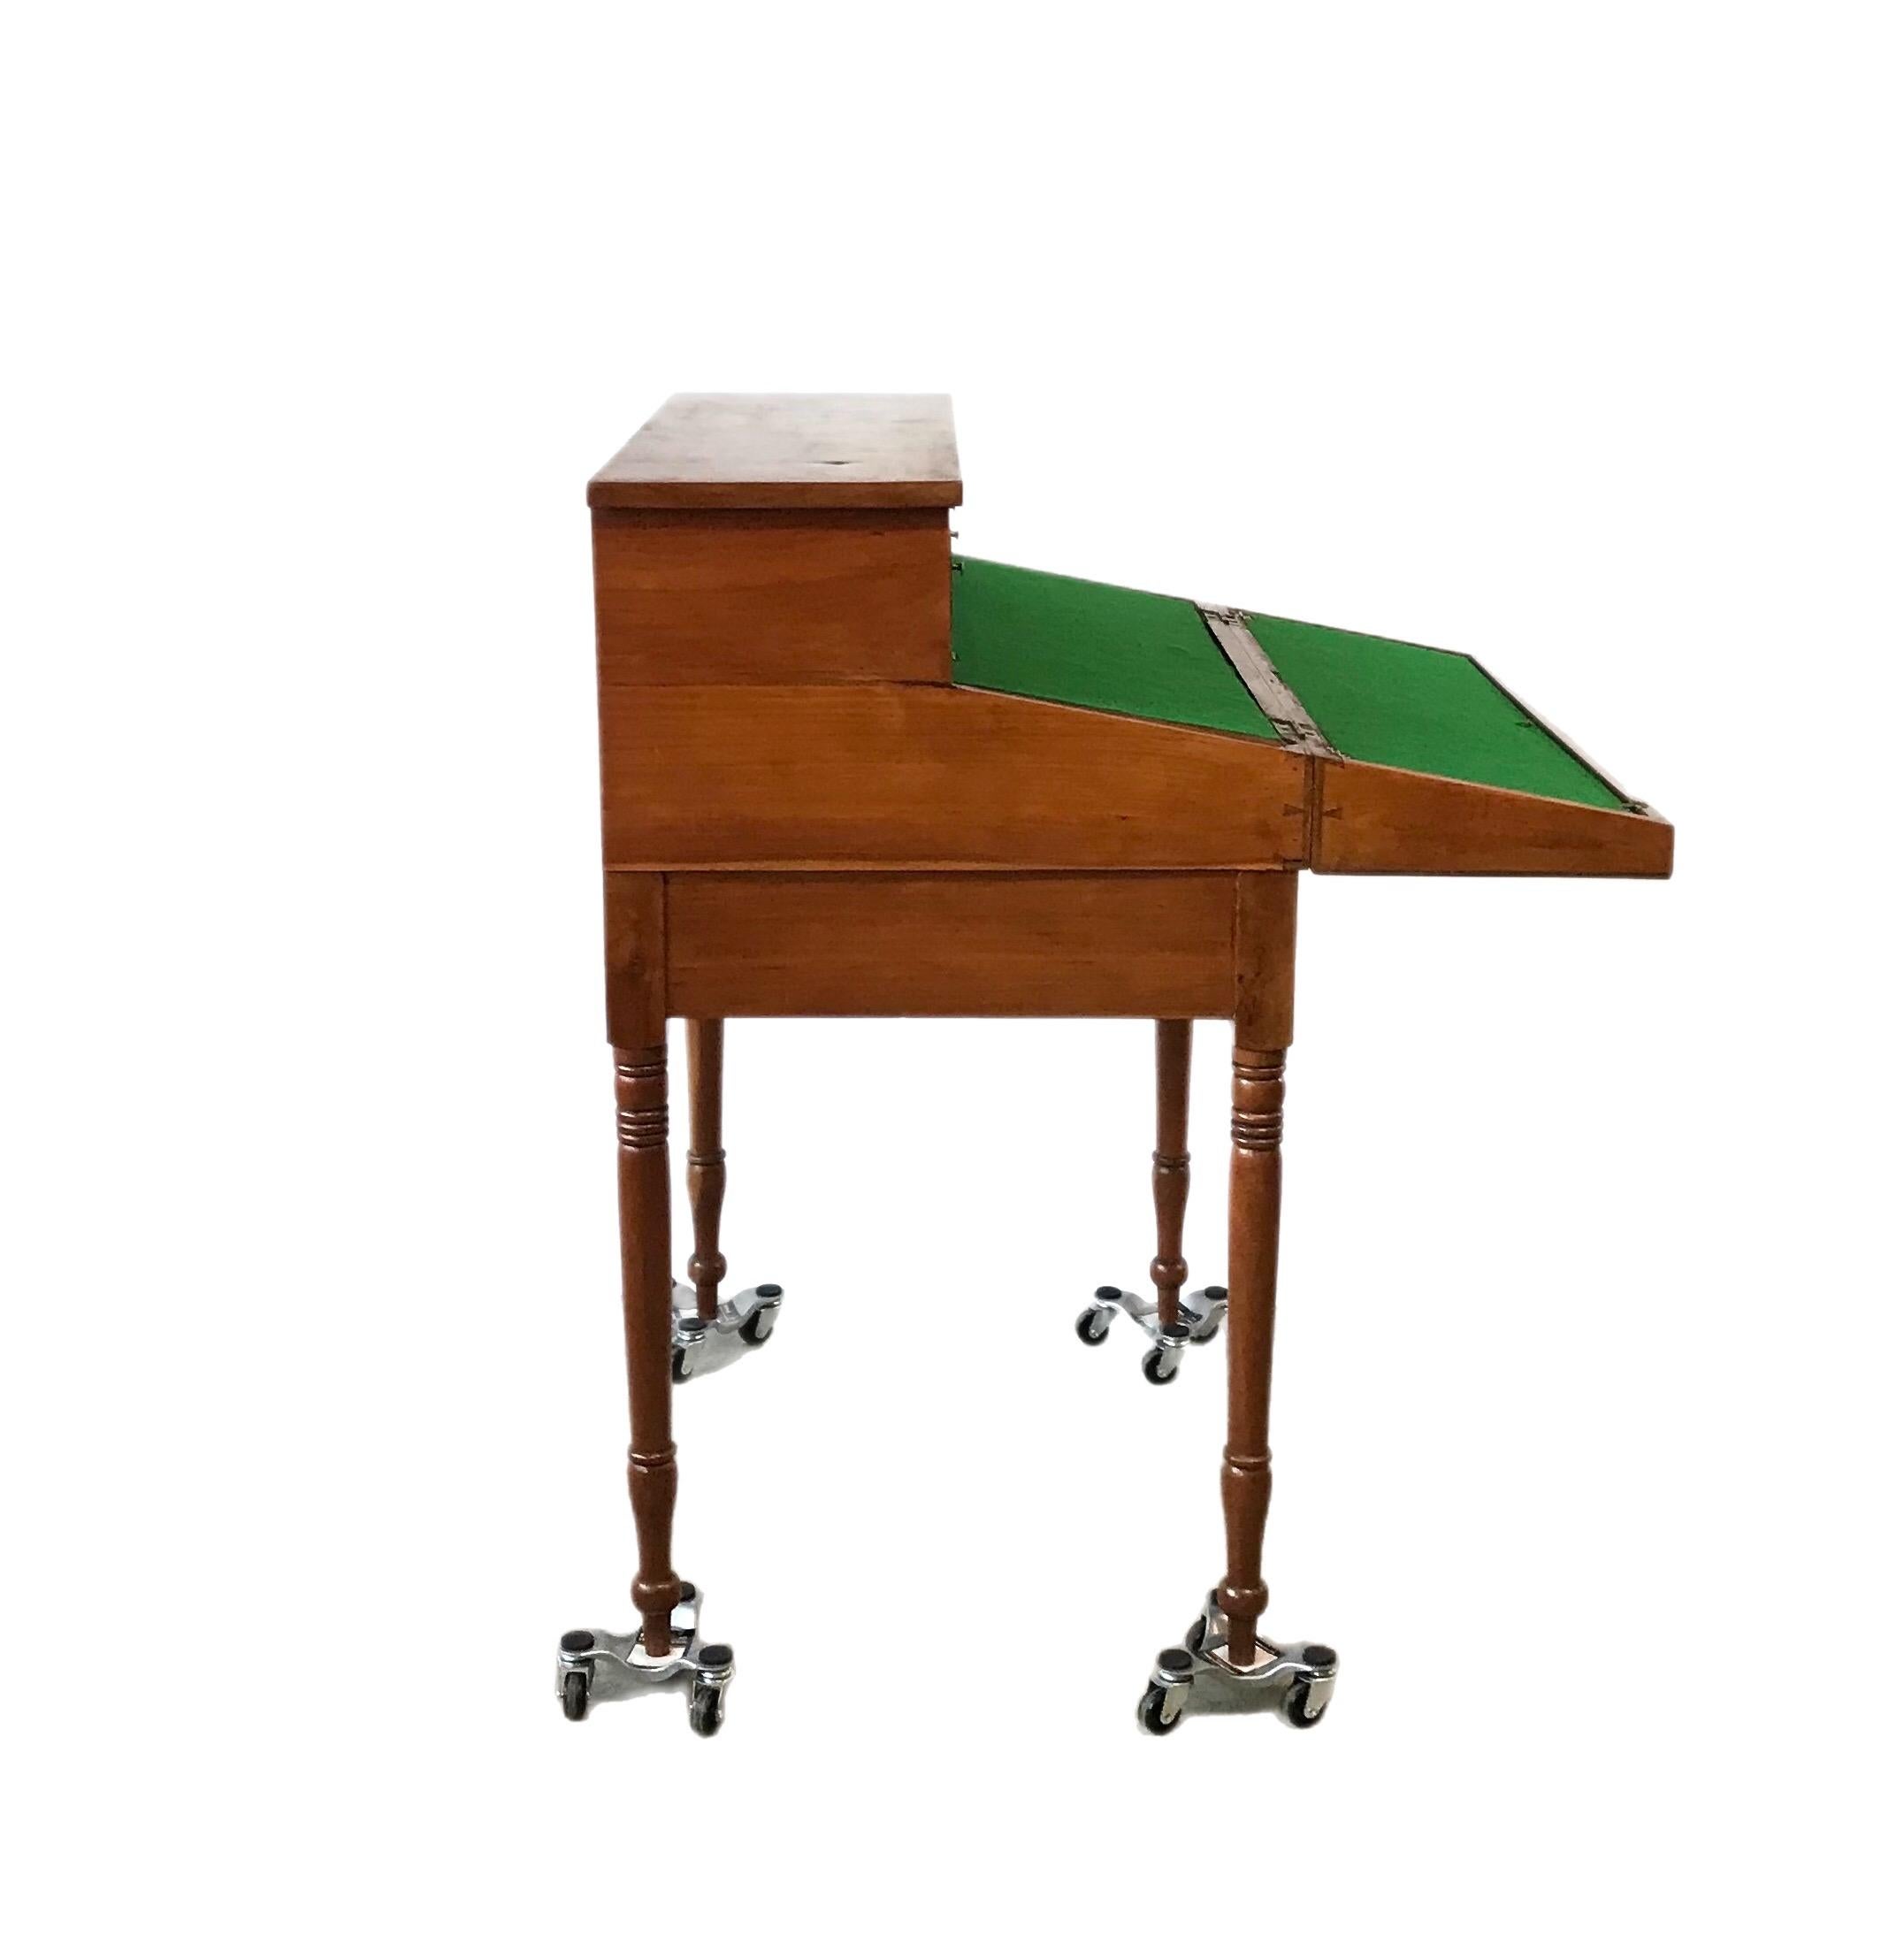 Uniques Sheraton styled plantation desk with folding top, when extended reveals a hideaway compartment for document storage. The two top drawers are in a fixed, locked position when the top is folded and secured. Piece features a third bottom drawer